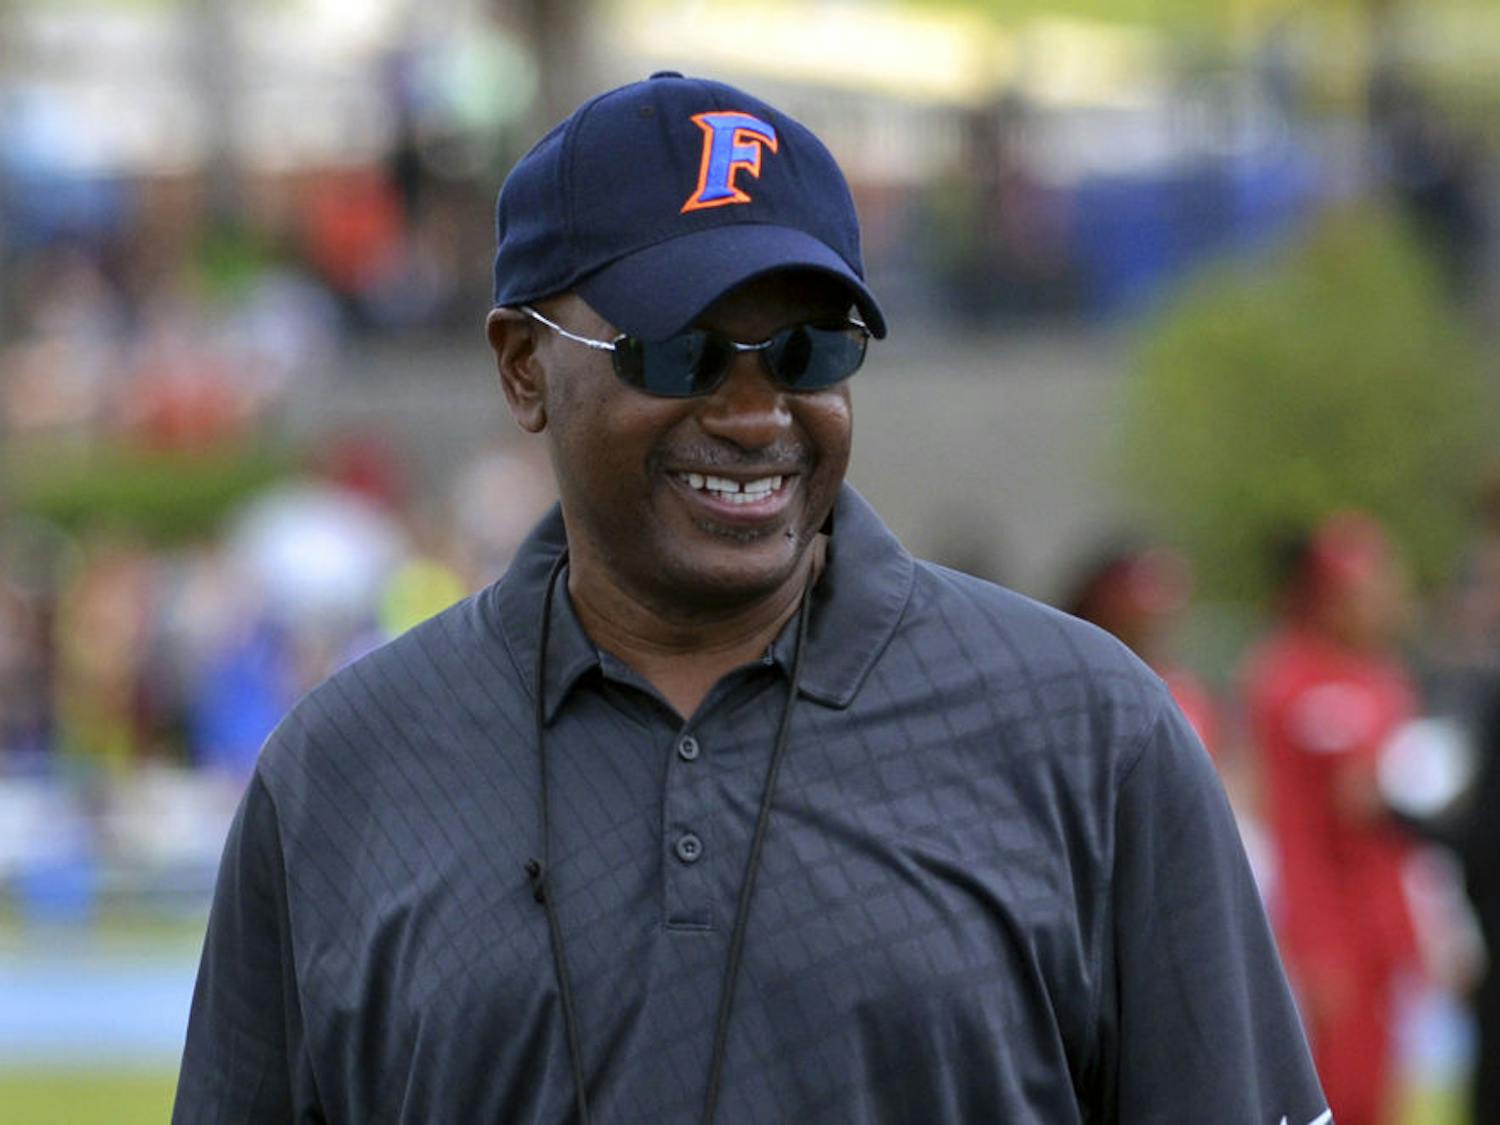 UF coach Mike Holloway smiles during the 2015 Florida Relays at James G. Pressly Stadium.